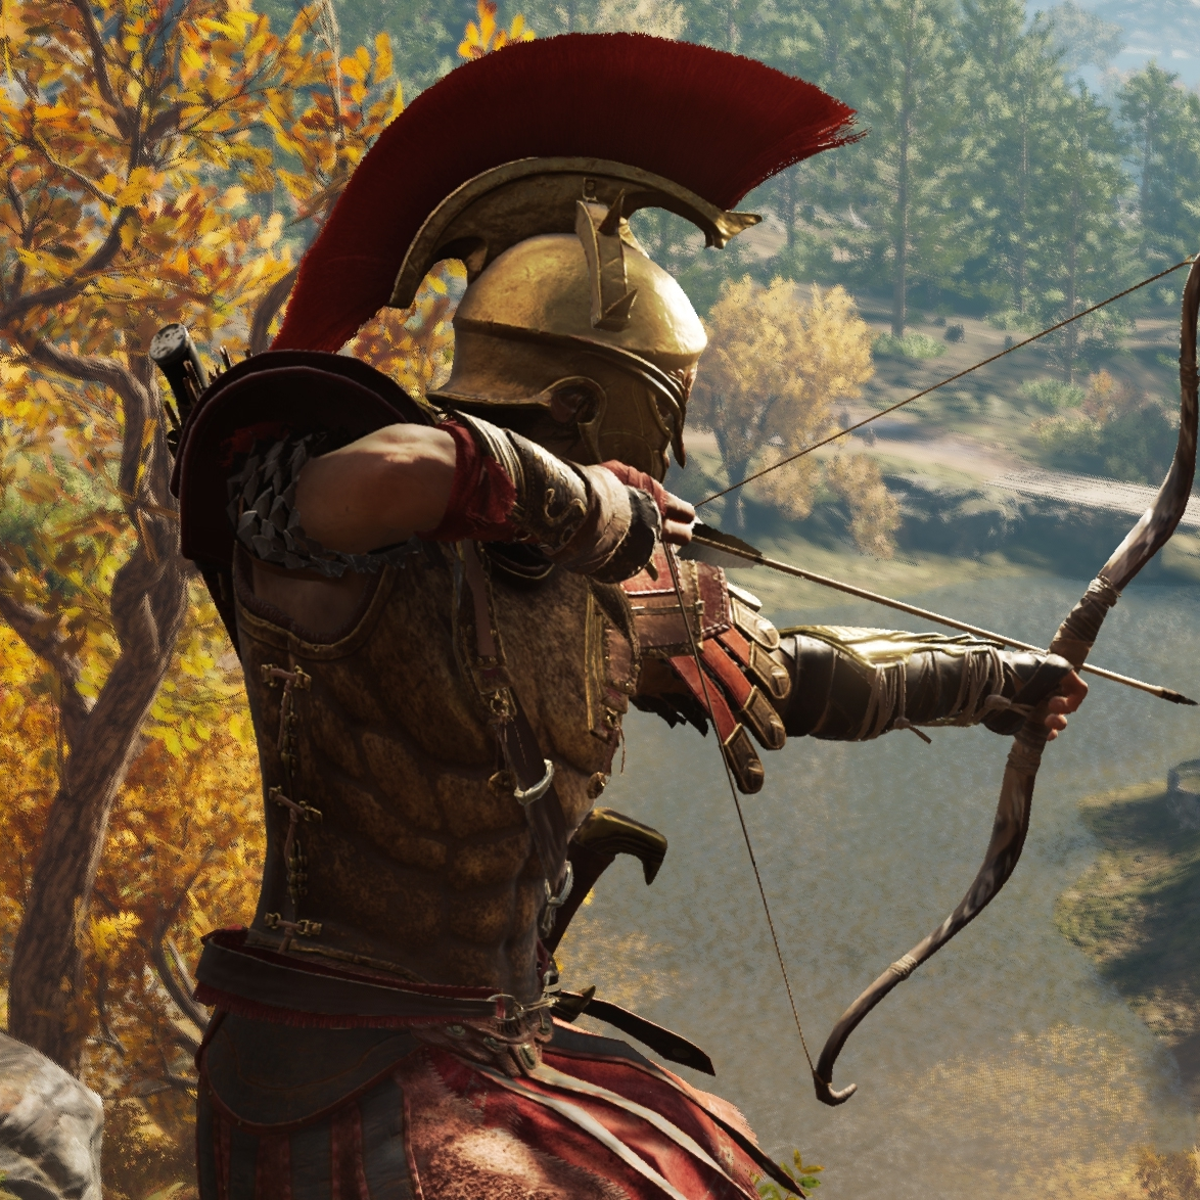 Assassin's Creed Odyssey: How to Get the Best Armor